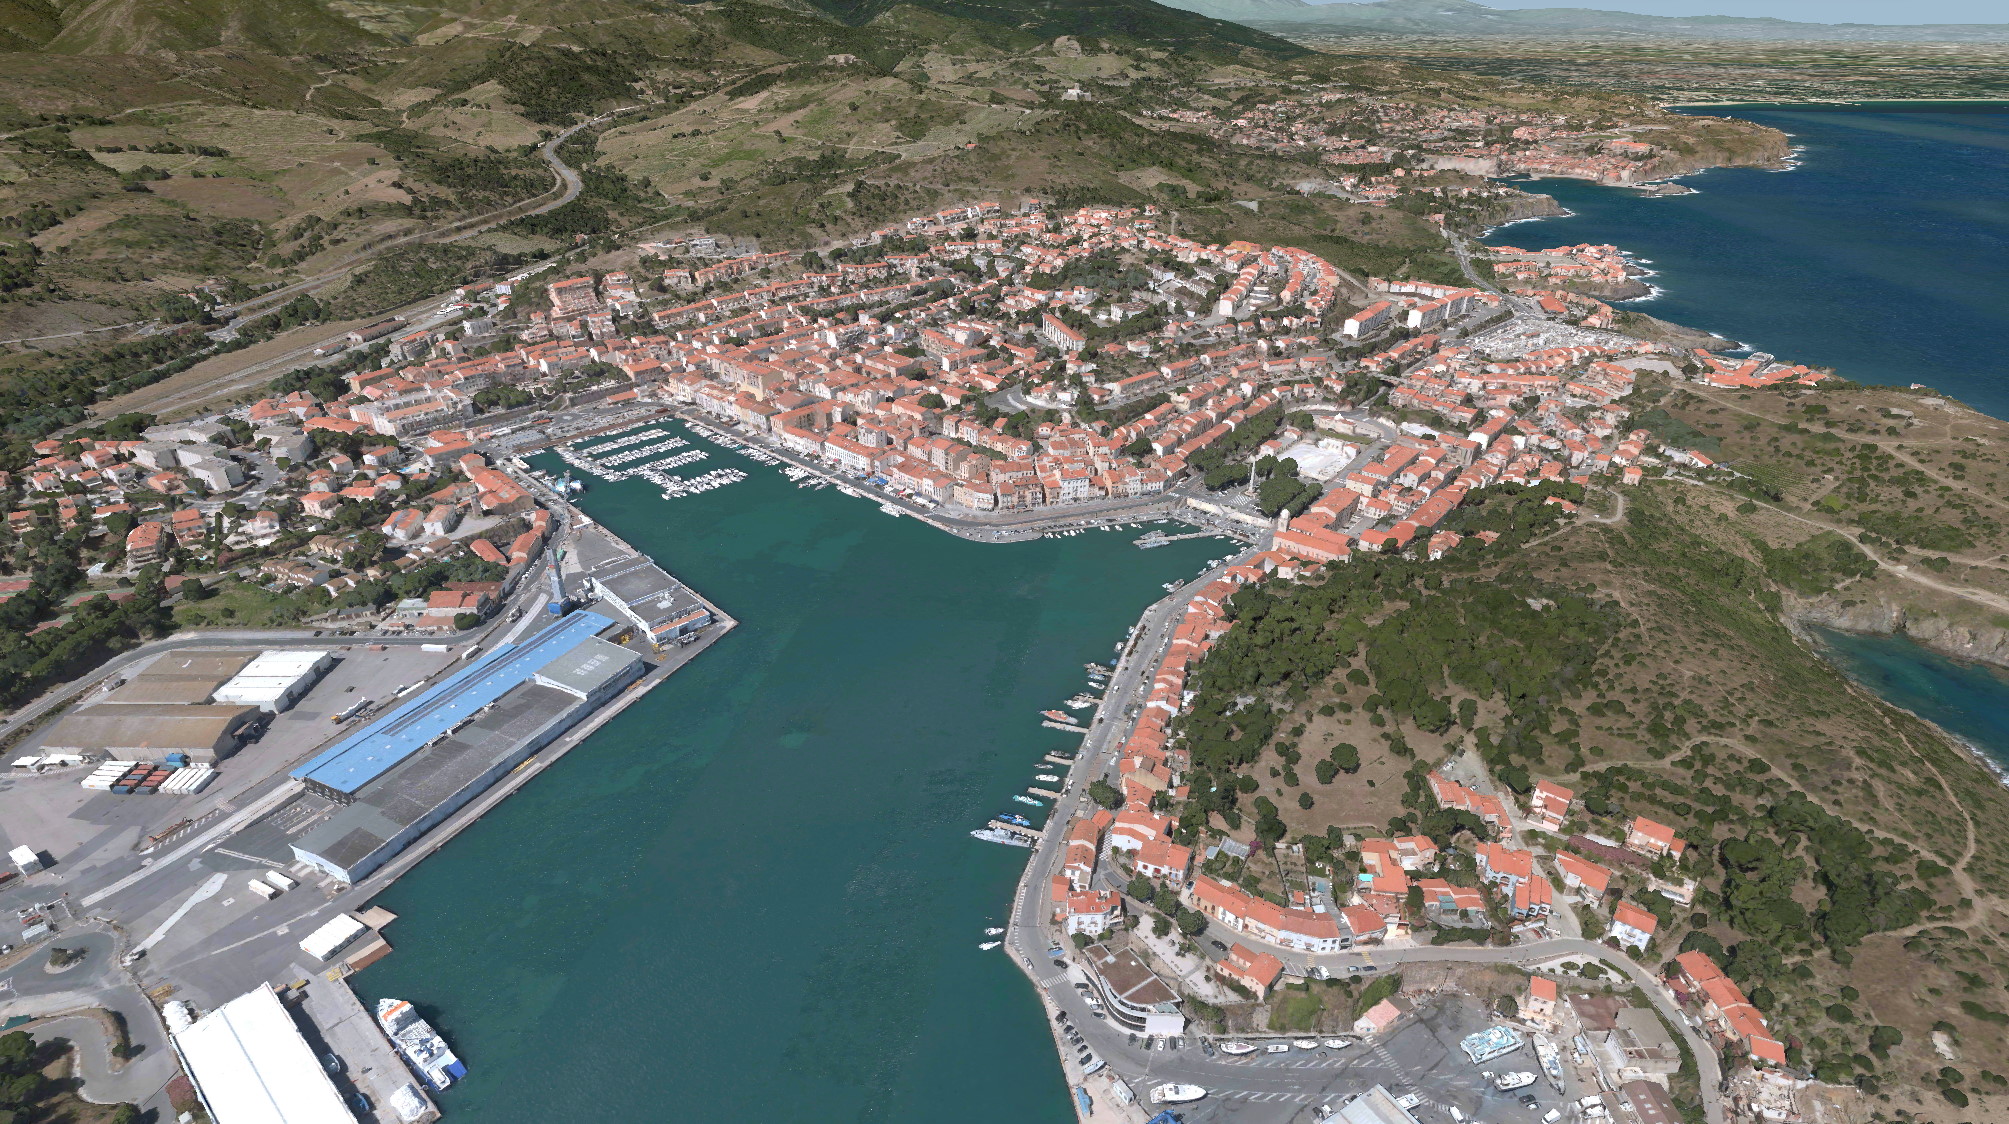 A view of Port Vendres